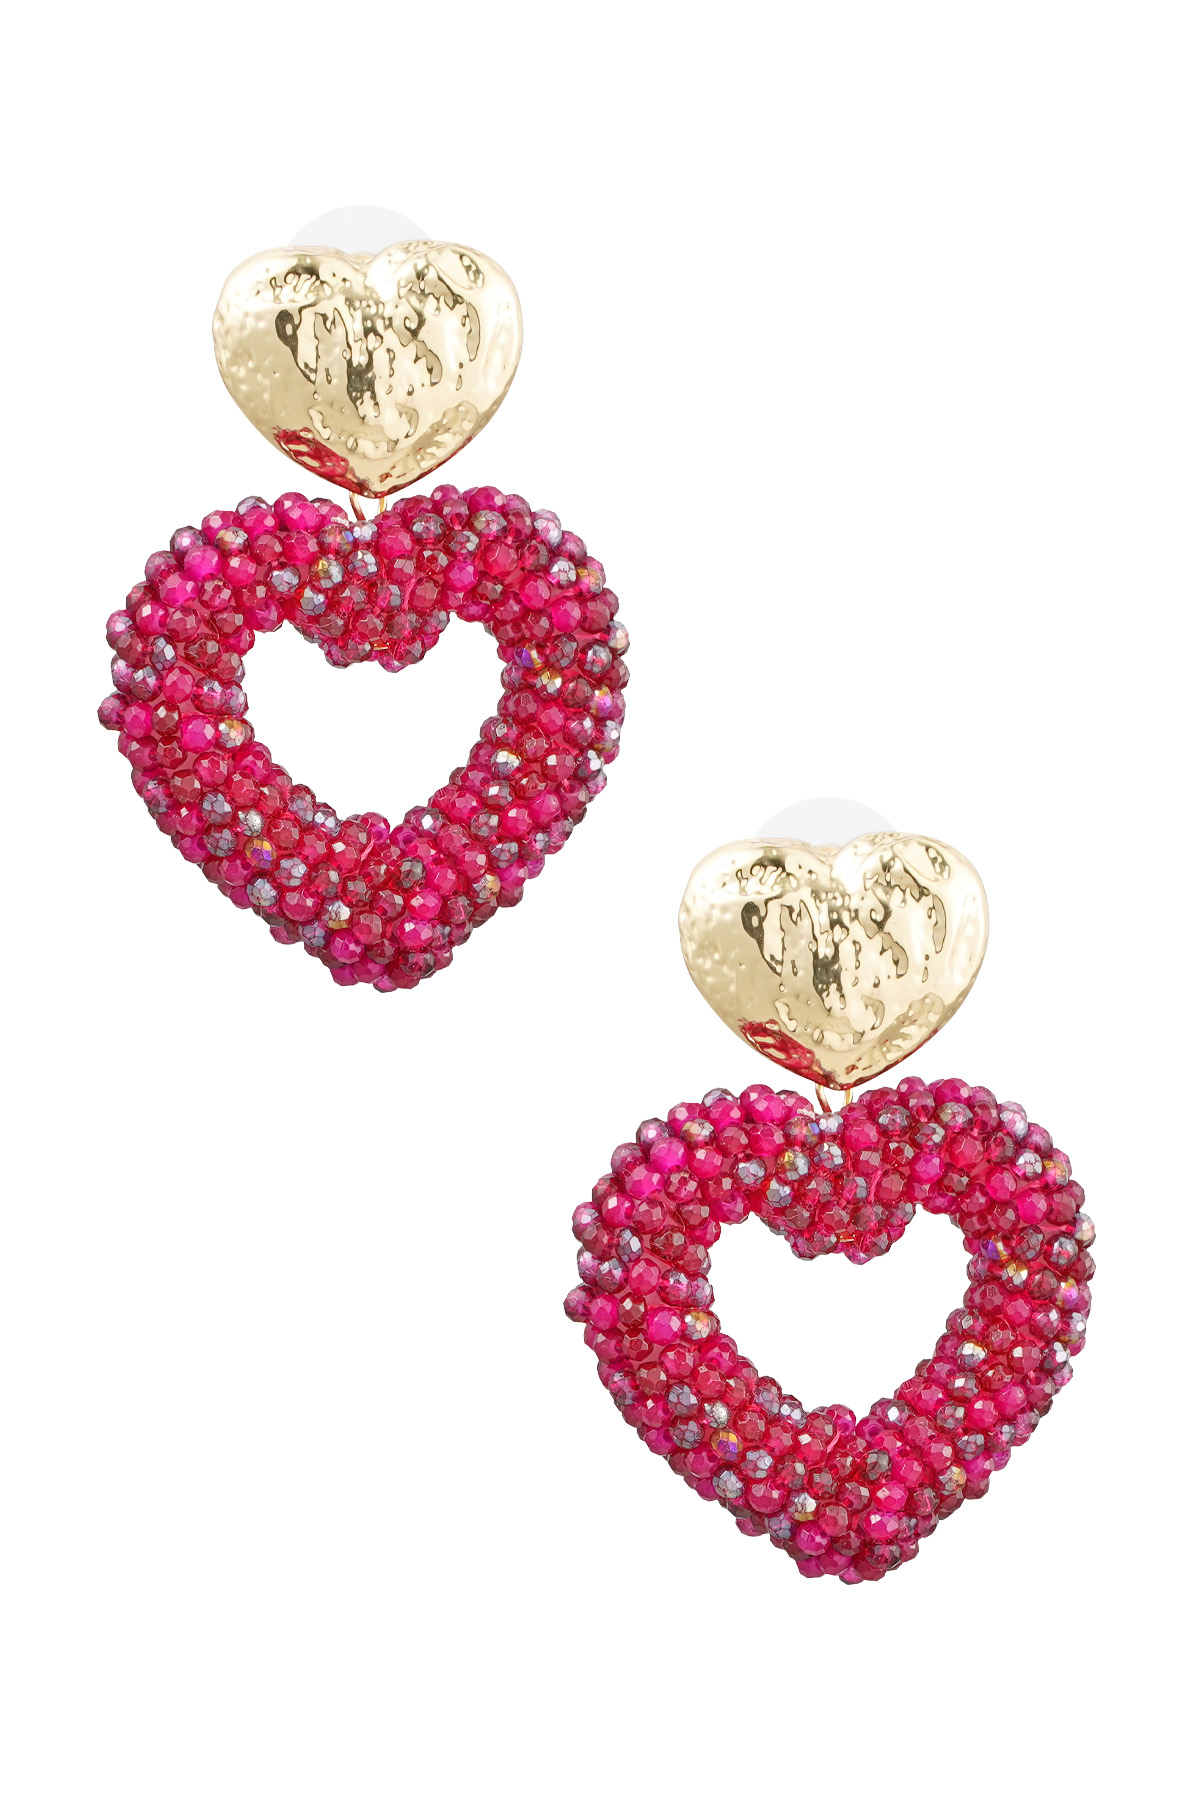 Earrings heart made of beads - gold/pink